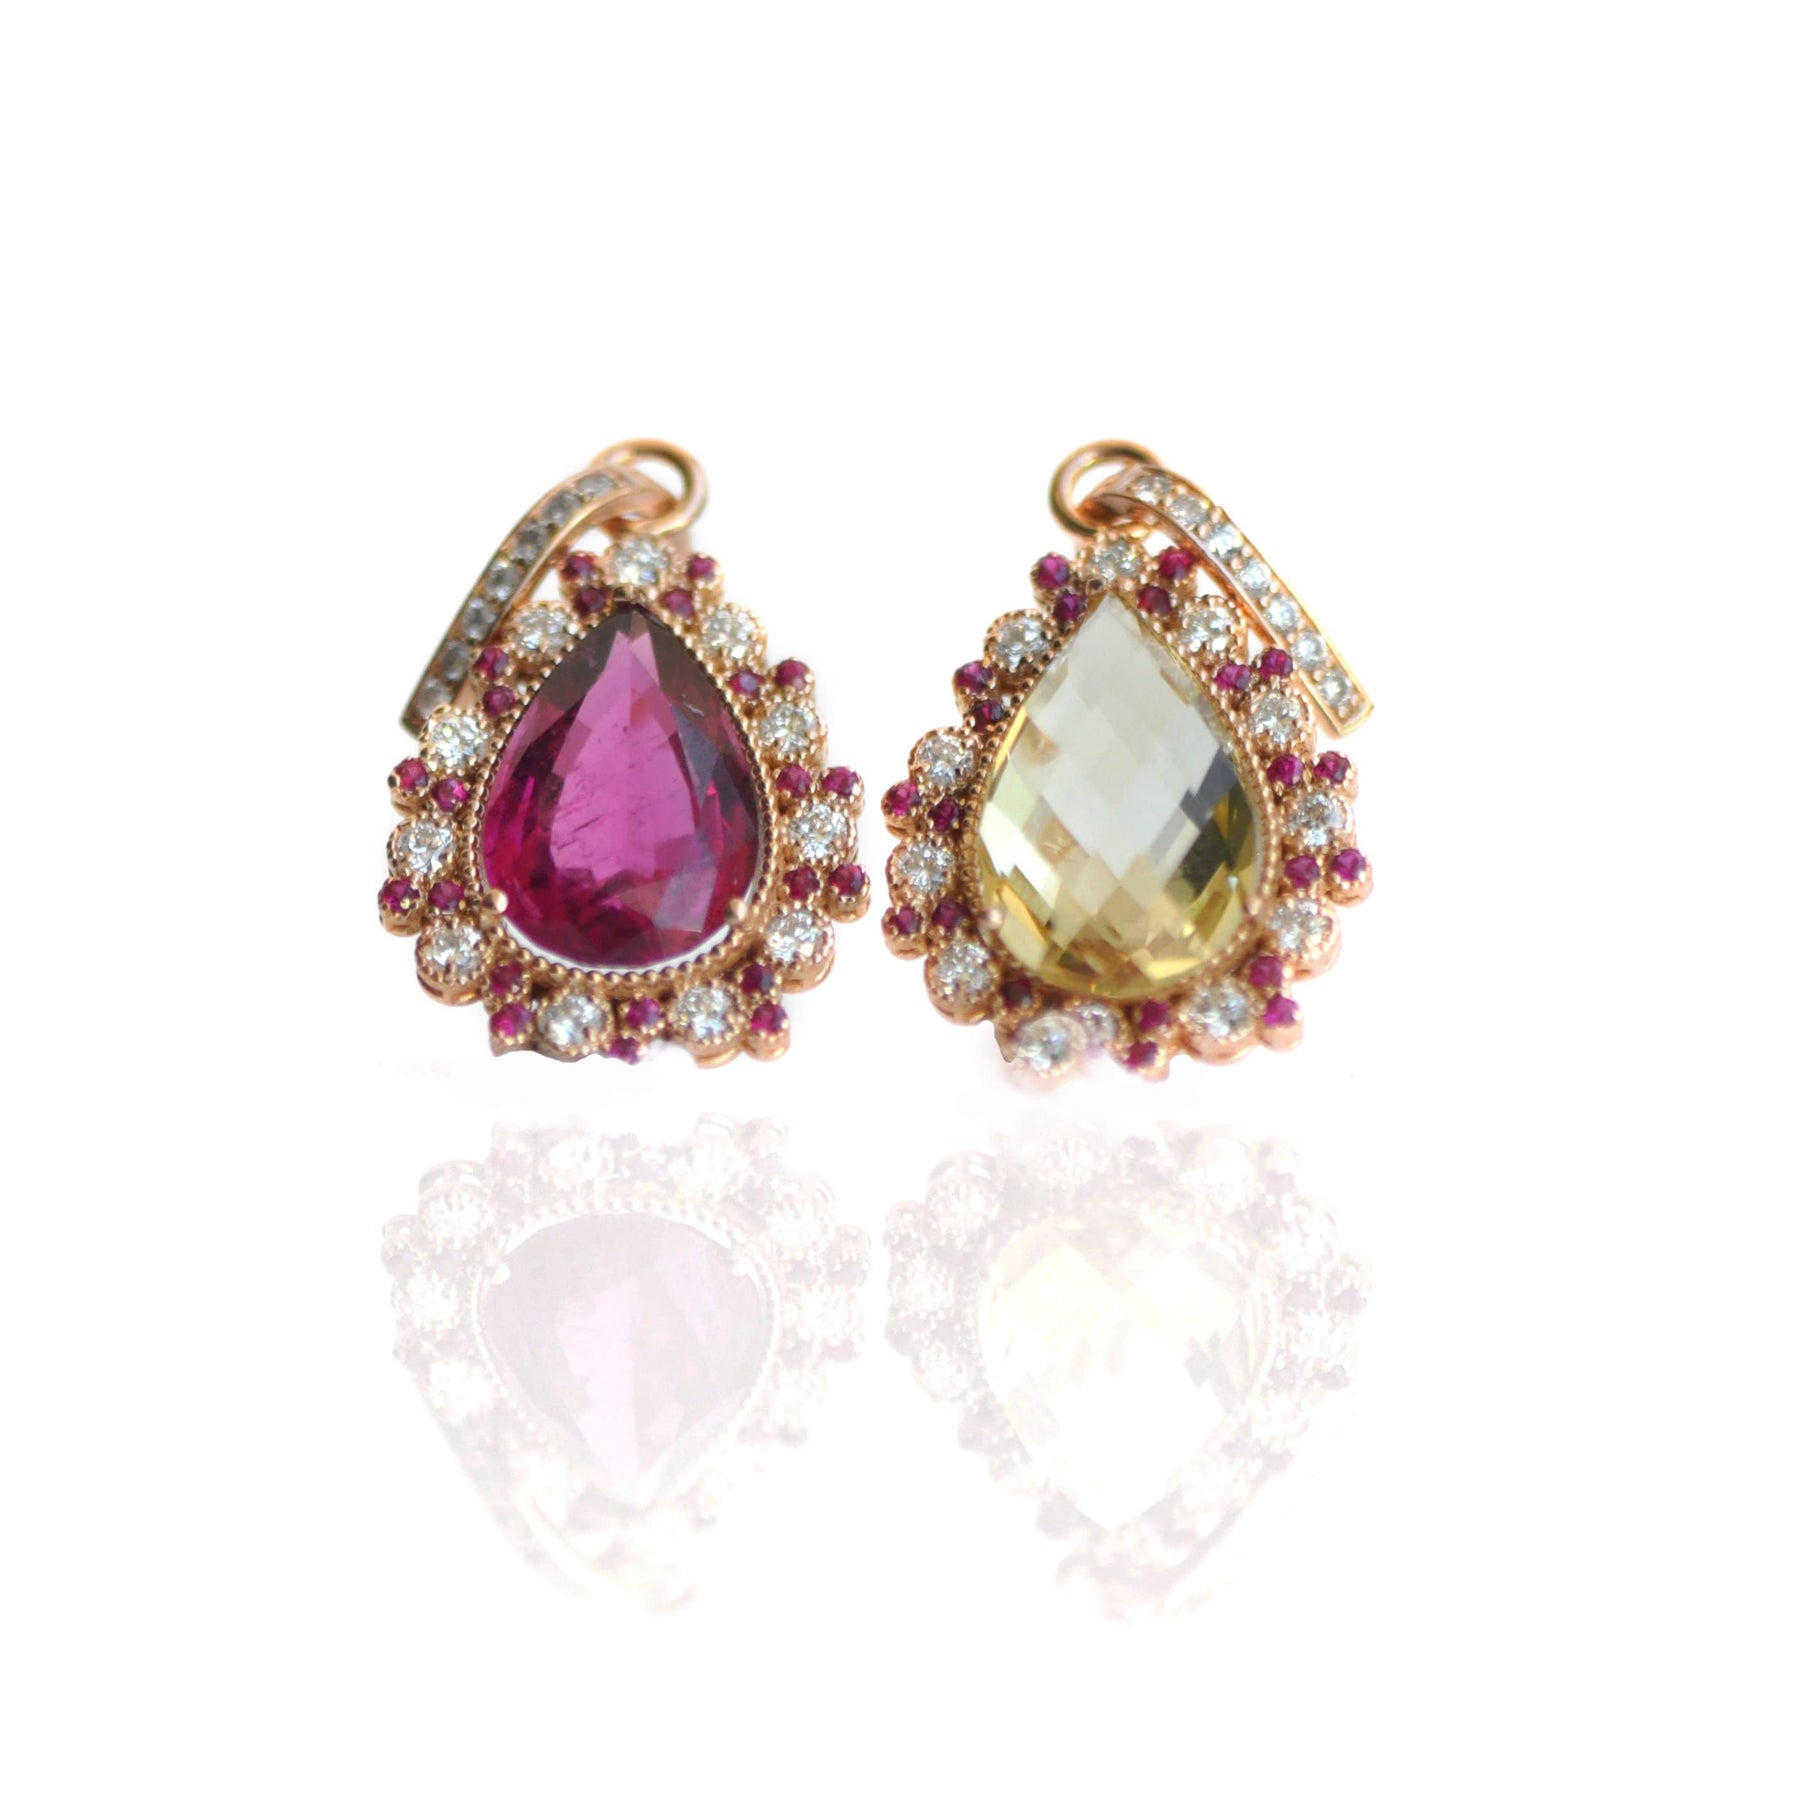 Chris Aire Gem Symphony Earrings - Chris Aire Fine Jewelry & Timepieces